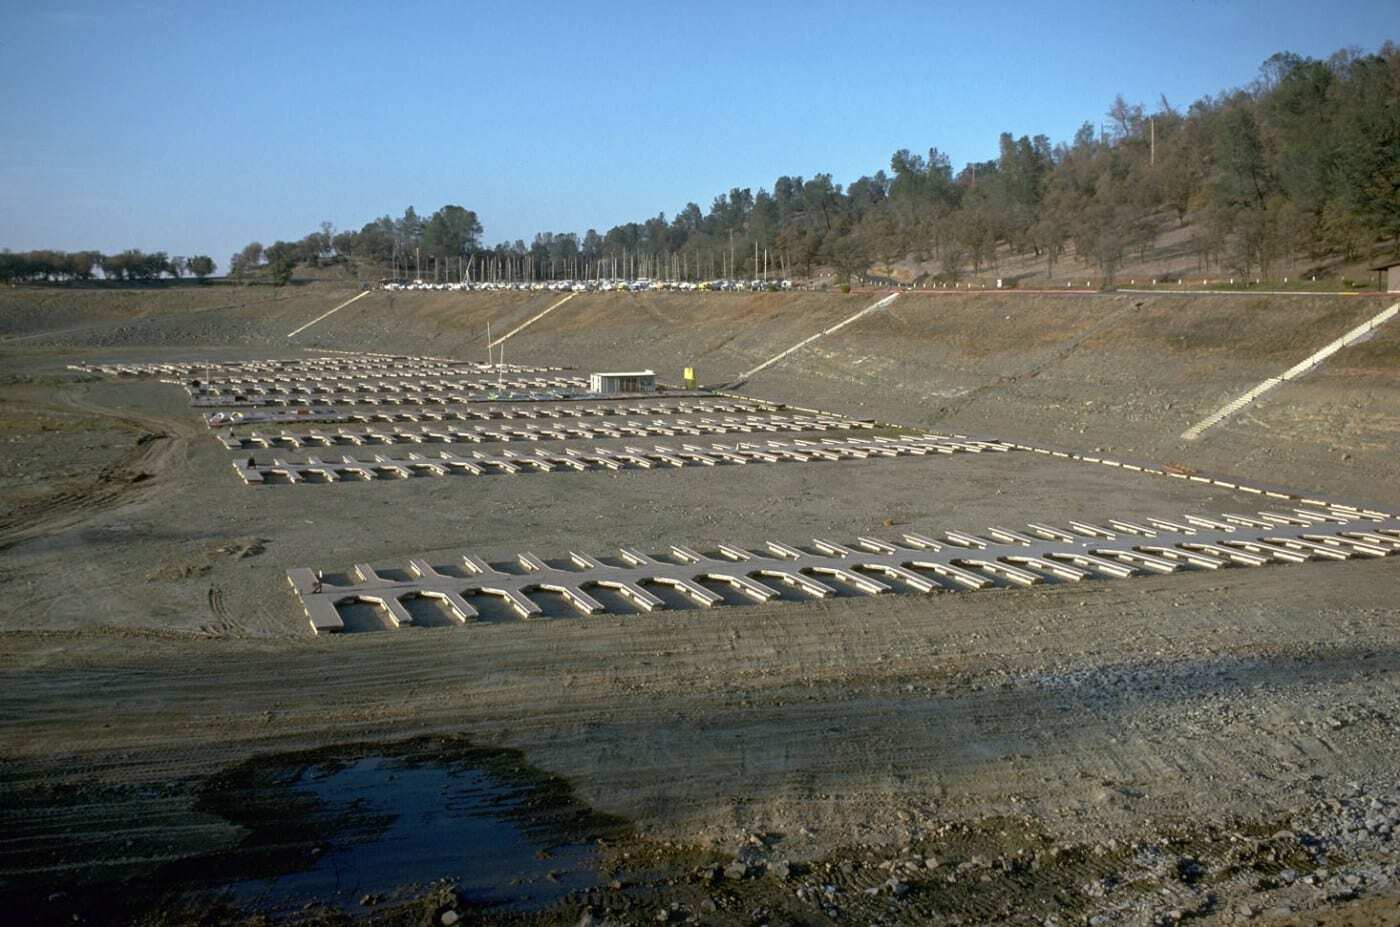 Boat slips in Folsom Lake in a drought (1976).  The reservoir was at 18 percent of capacity on Tuesday (Jan. 7, 2013). Source: California Department of Water Resources